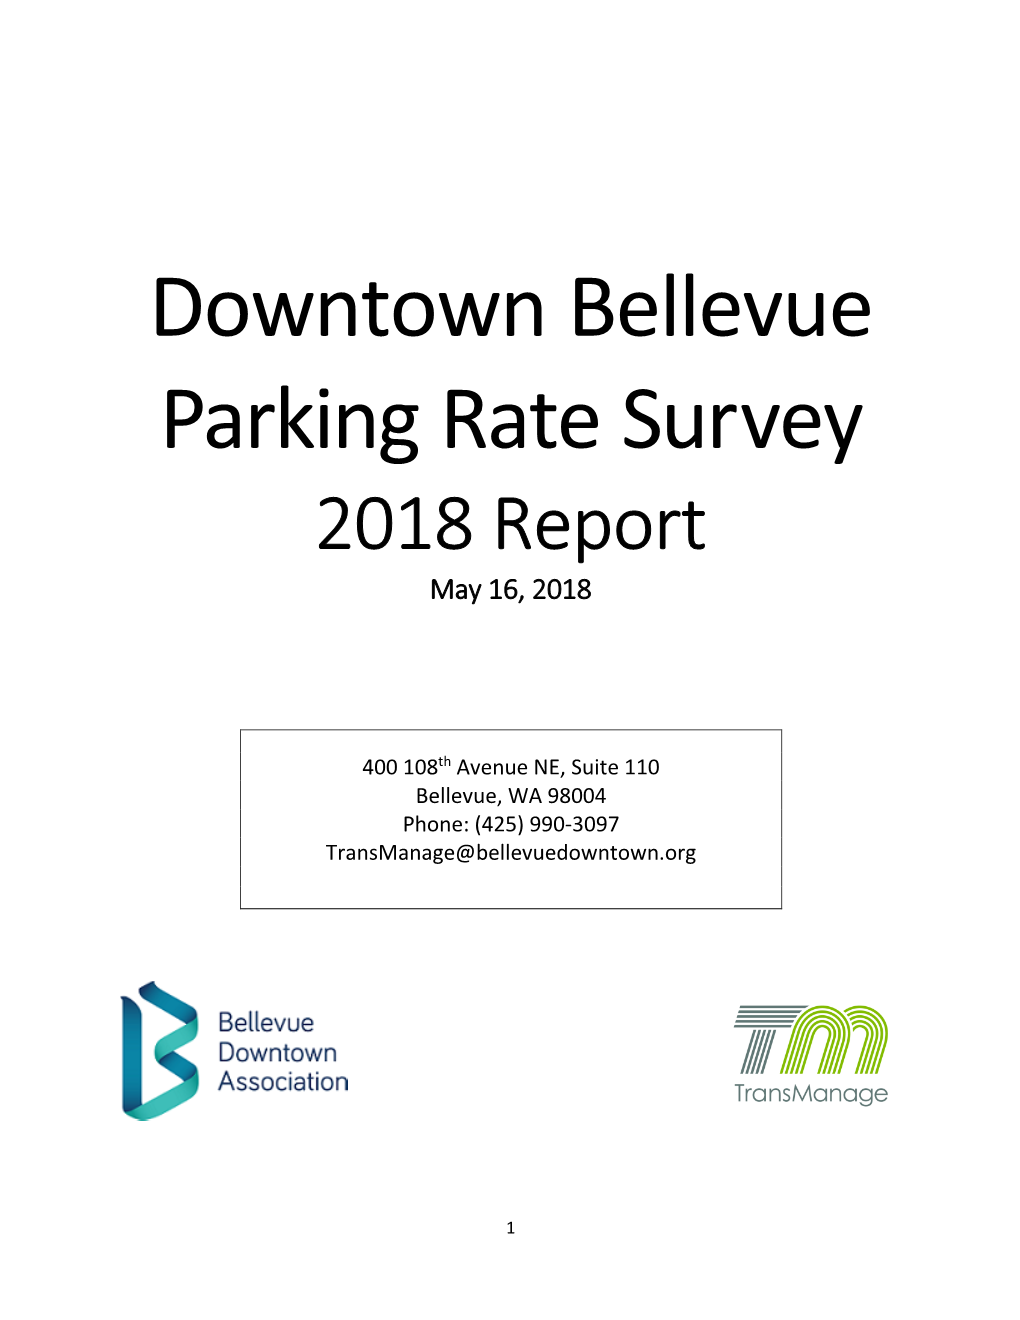 Downtown Bellevue Parking Rate Survey 2018 Report May 16, 2018